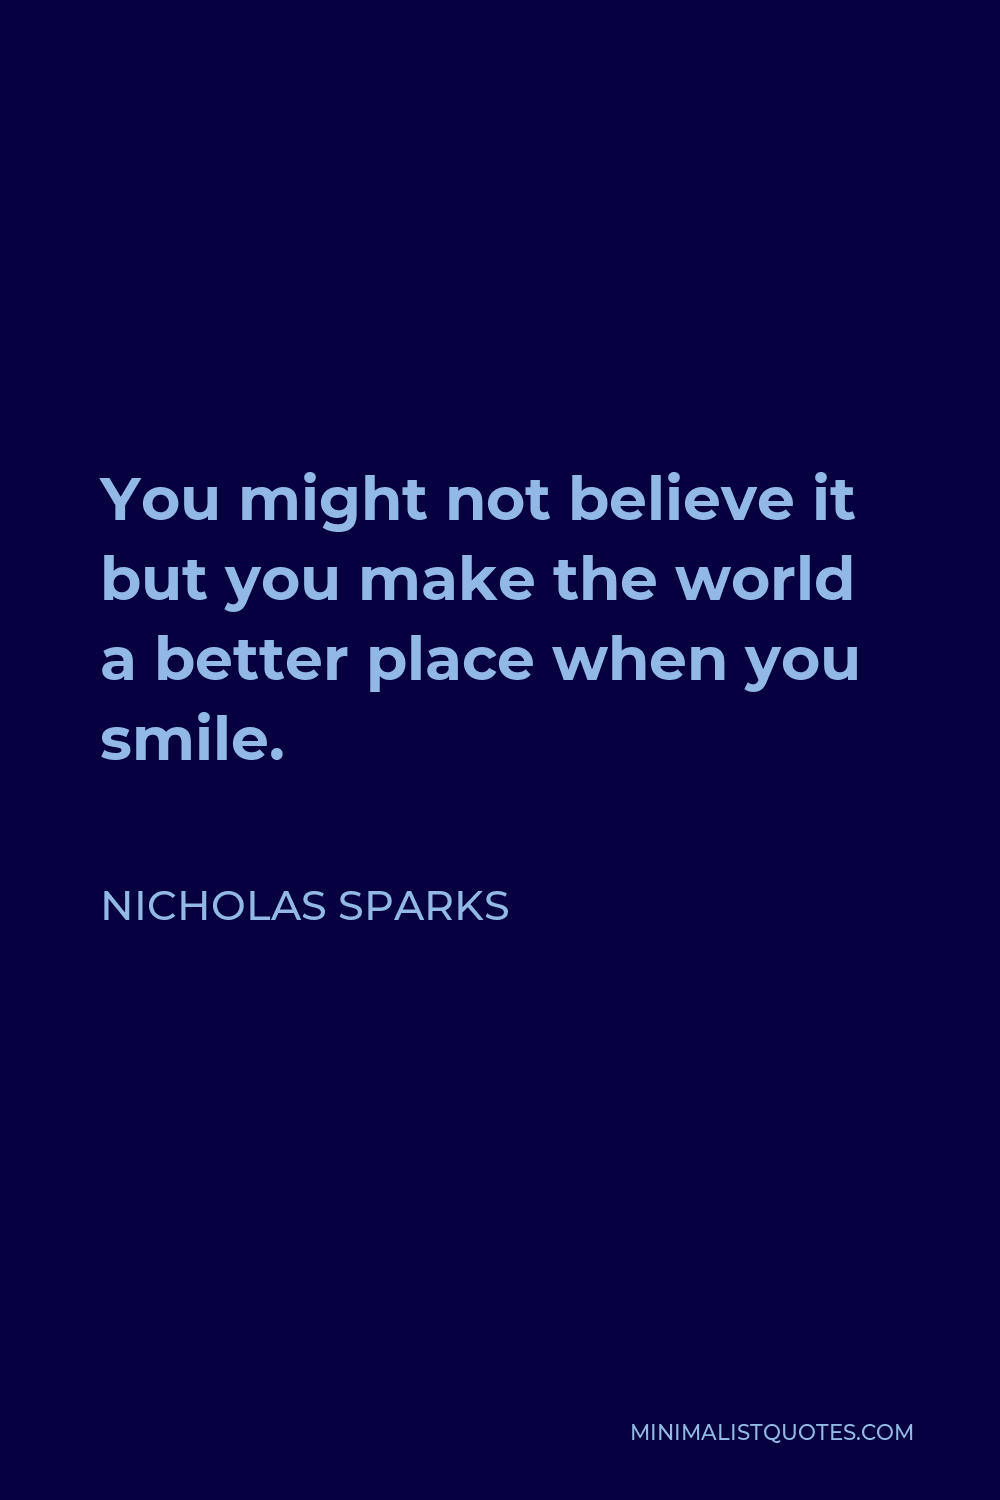 Nicholas Sparks Quote - You might not believe it but you make the world a better place when you smile.